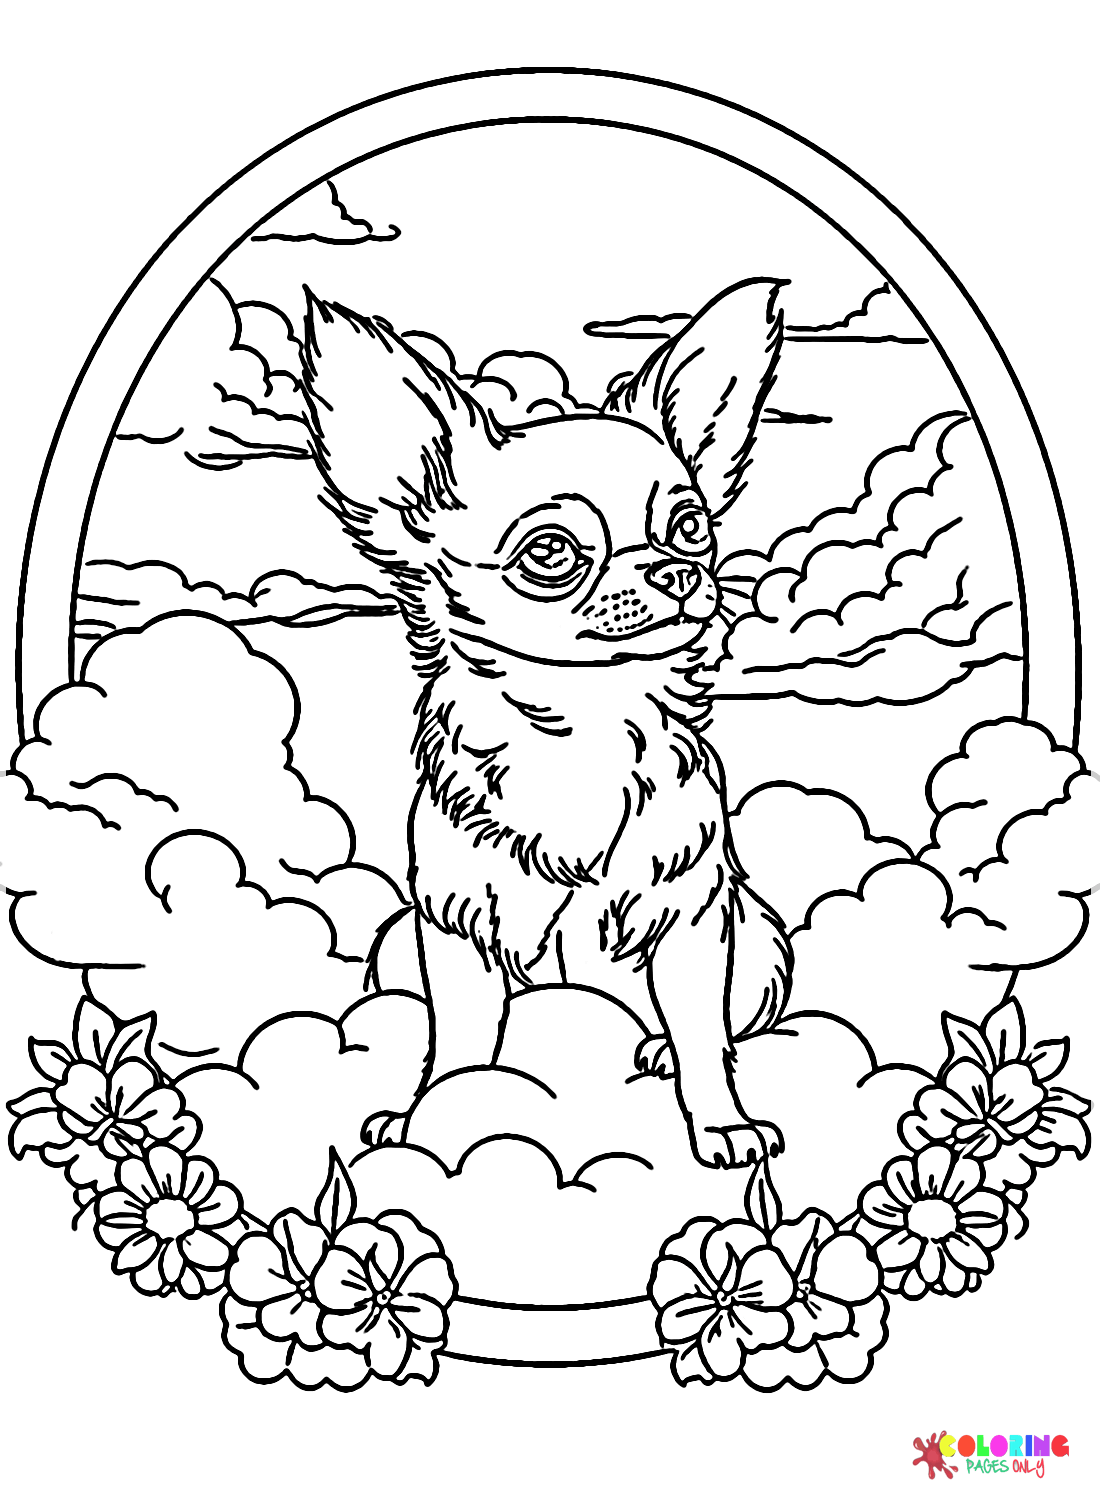 Chihuahua with Flowers and Clouds from Chihuahua